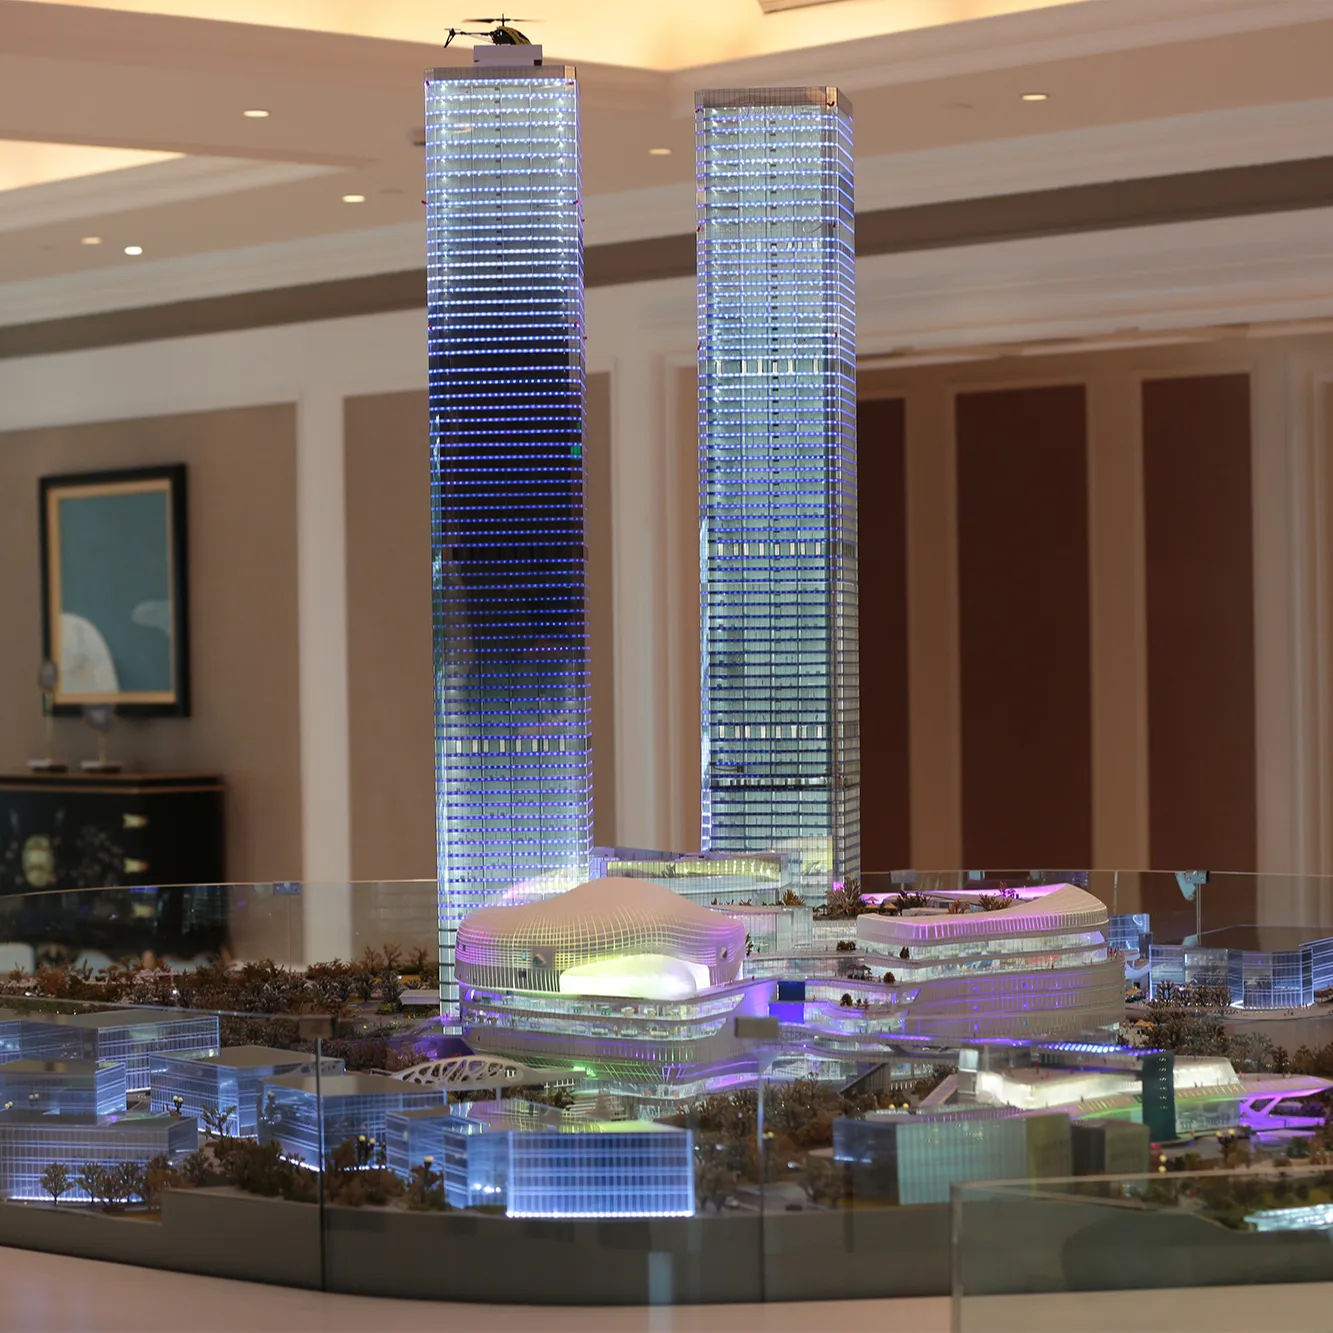 Professional Architectural scale building model custom scale LED lighting Urban planning model making 3D Real estate building